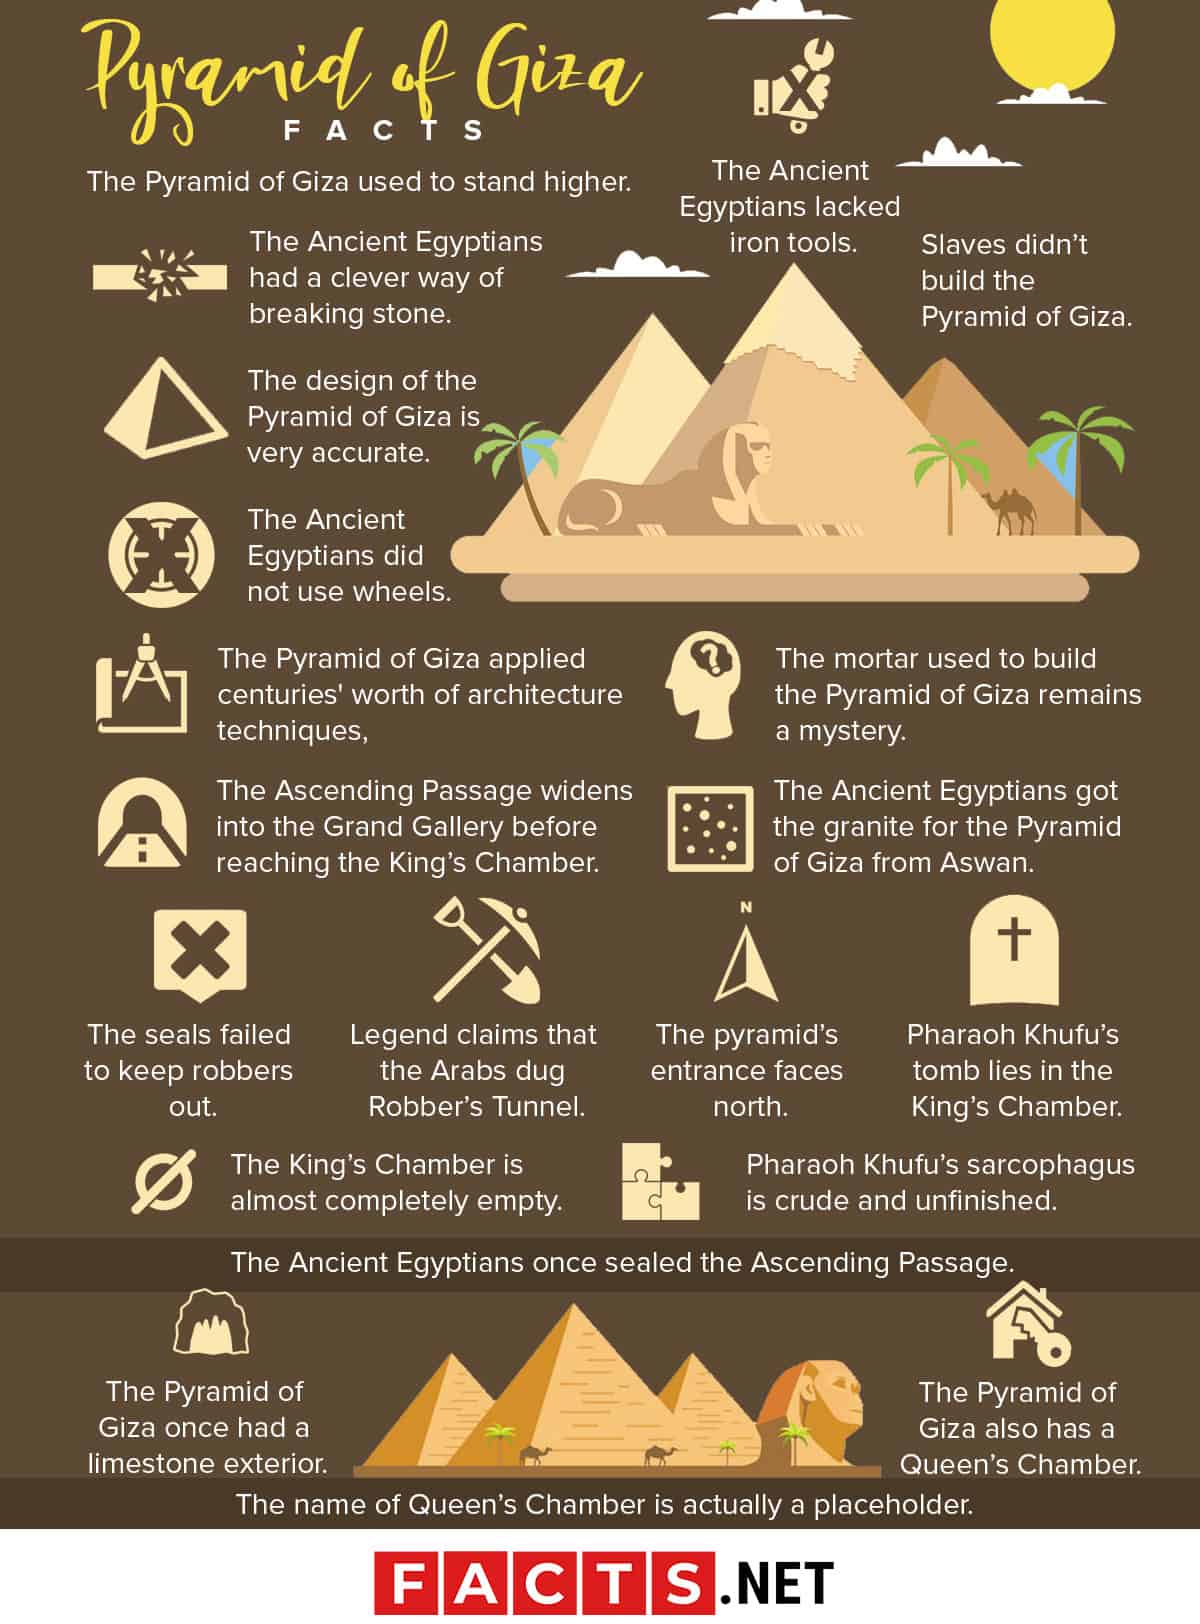 50 Pyramid of Giza Facts That Will Reveal Its Secrets